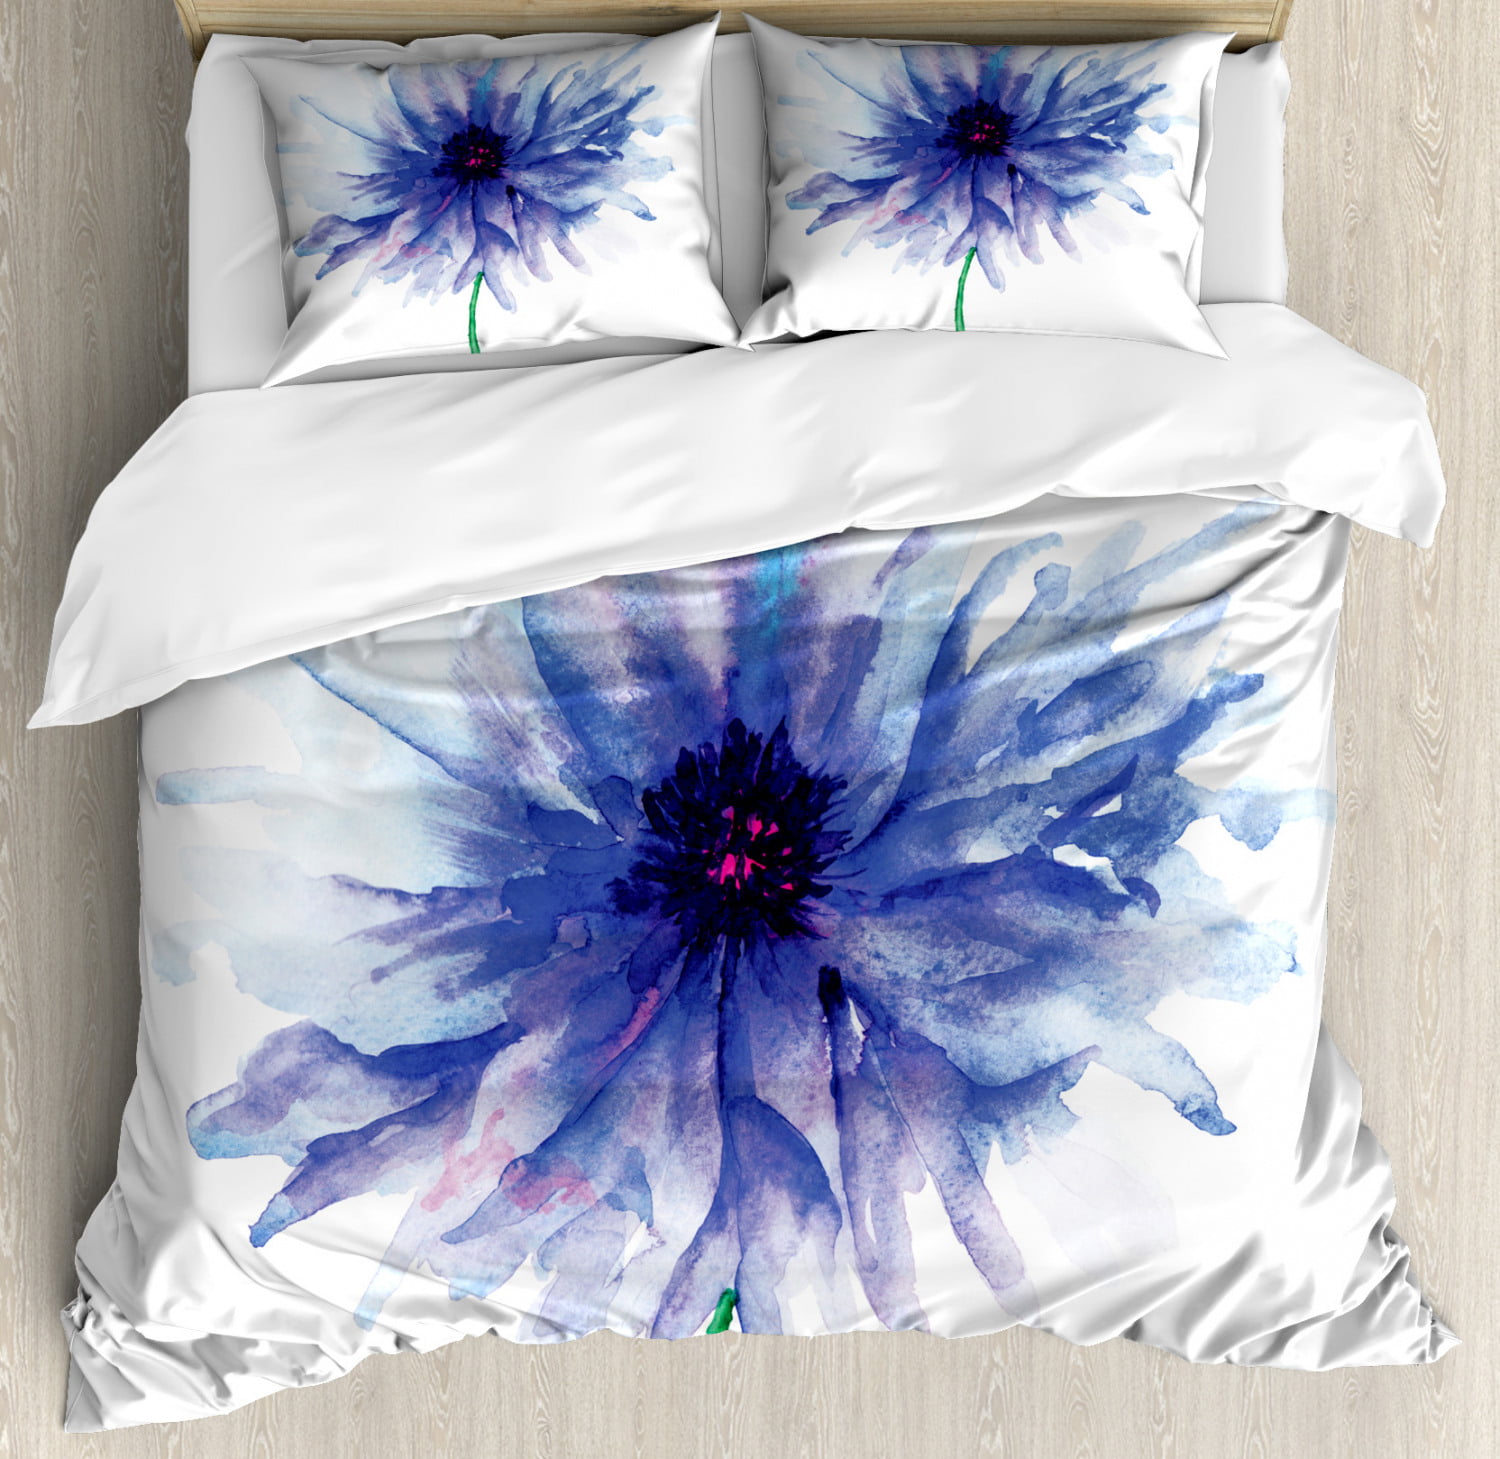 King Size Decorative 3 Piece Bedding Set with 2 Pillow Shams Violet Blue Ambesonne Grunge Duvet Cover Set Vibrant Watercolor Spots Oval Shapes Paintbrush Effect Abstract